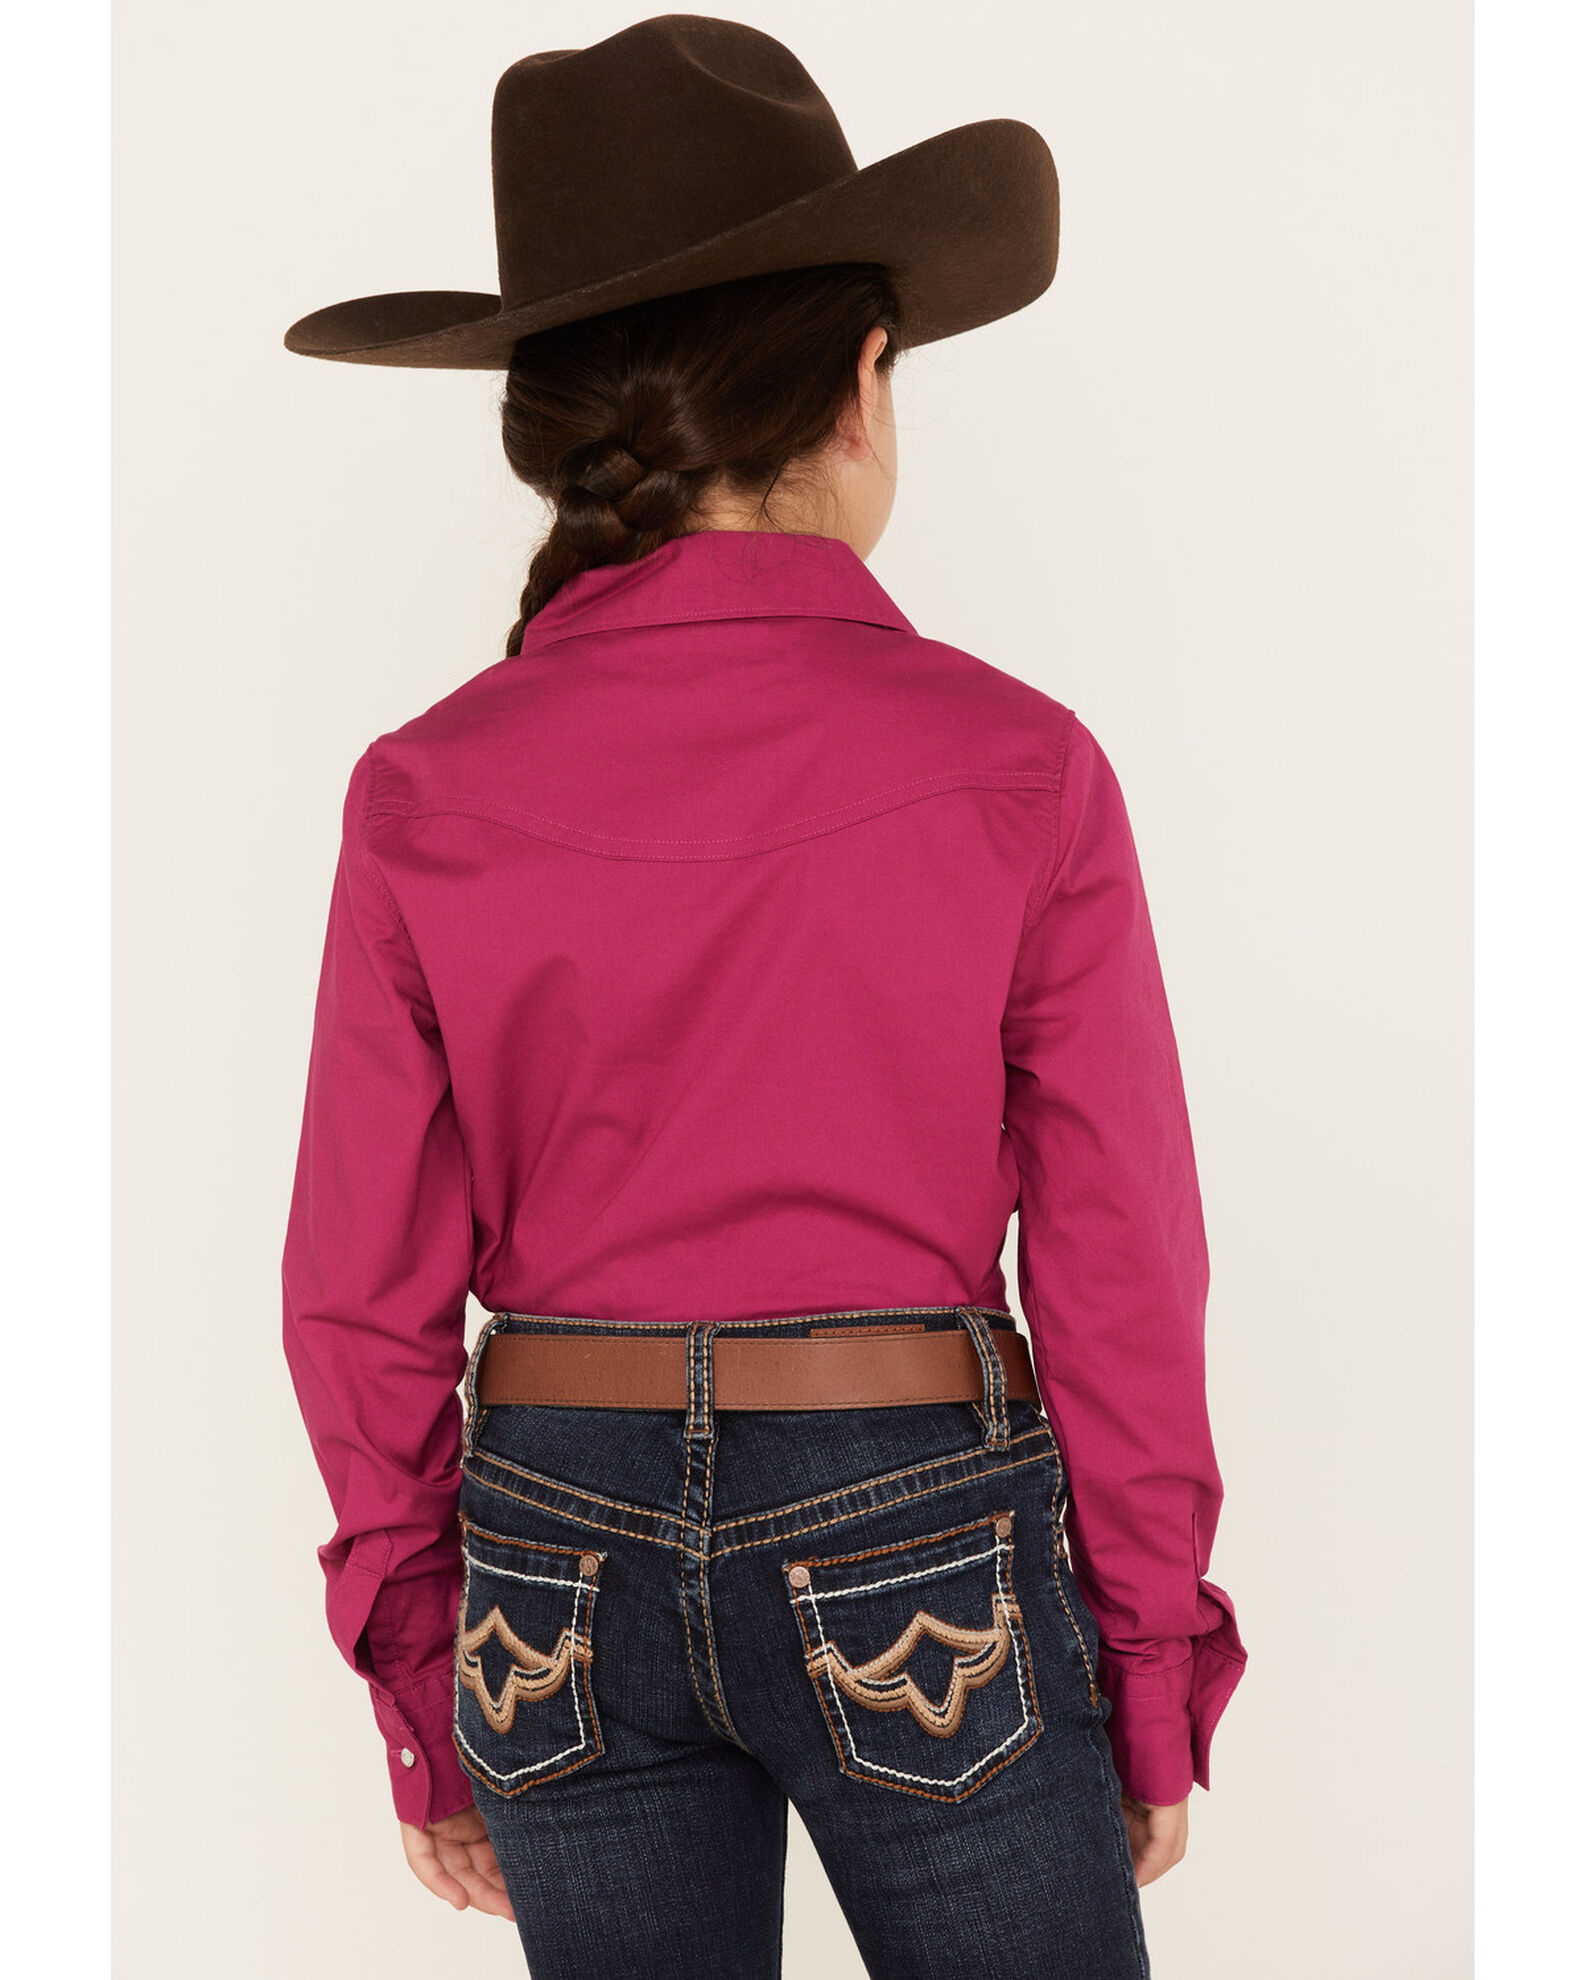 Product Name: Shyanne Girls' Rhinestone Long Sleeve Western Button-Down ...